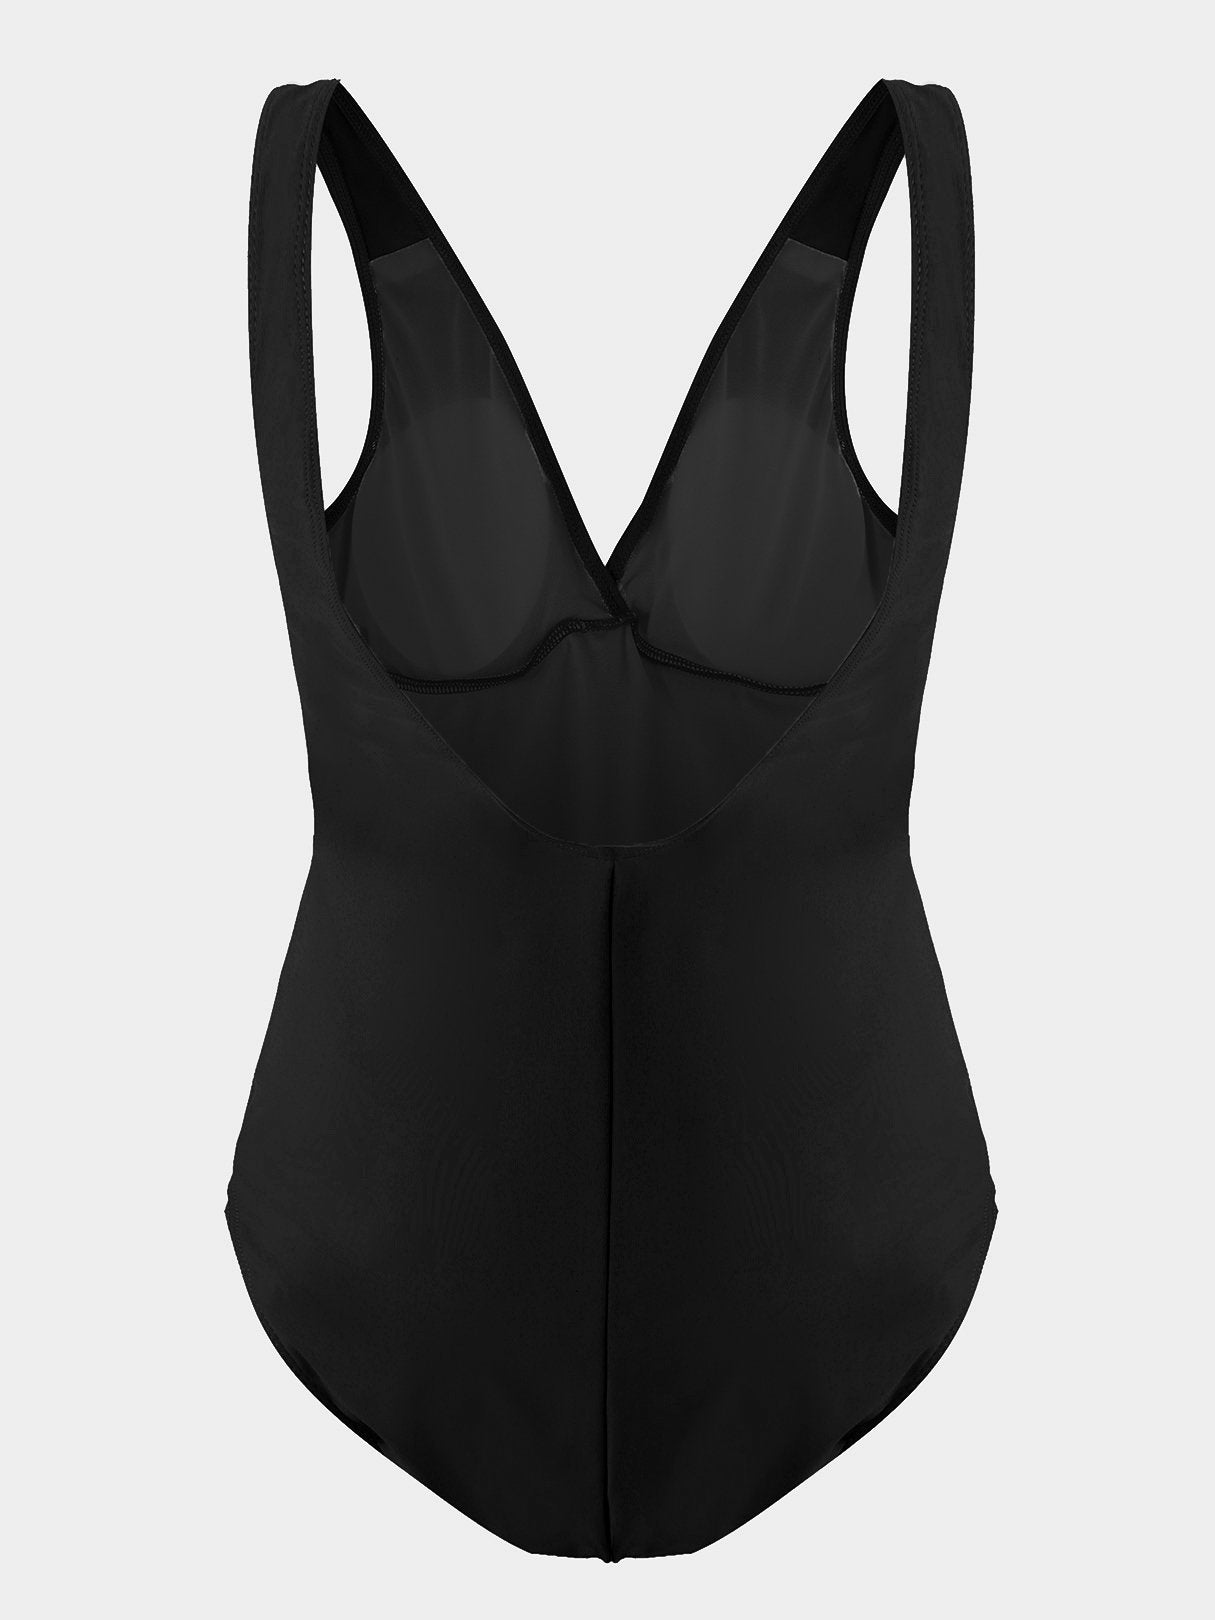 NEW FEELING Womens Black One-Pieces